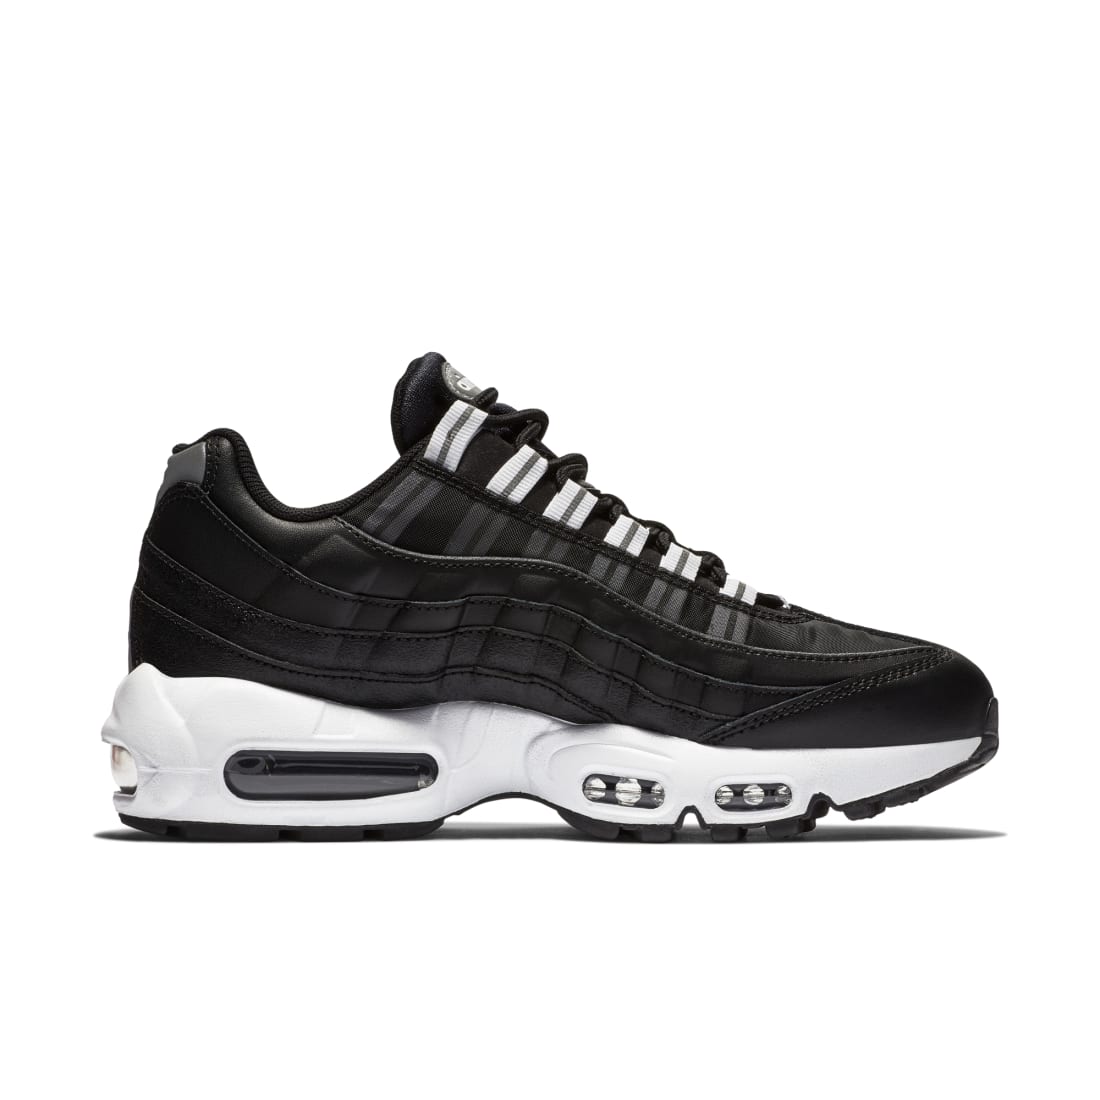 Nike Air Max Black Reflect Silver | Nike Release Dates, Calendar, Prices &